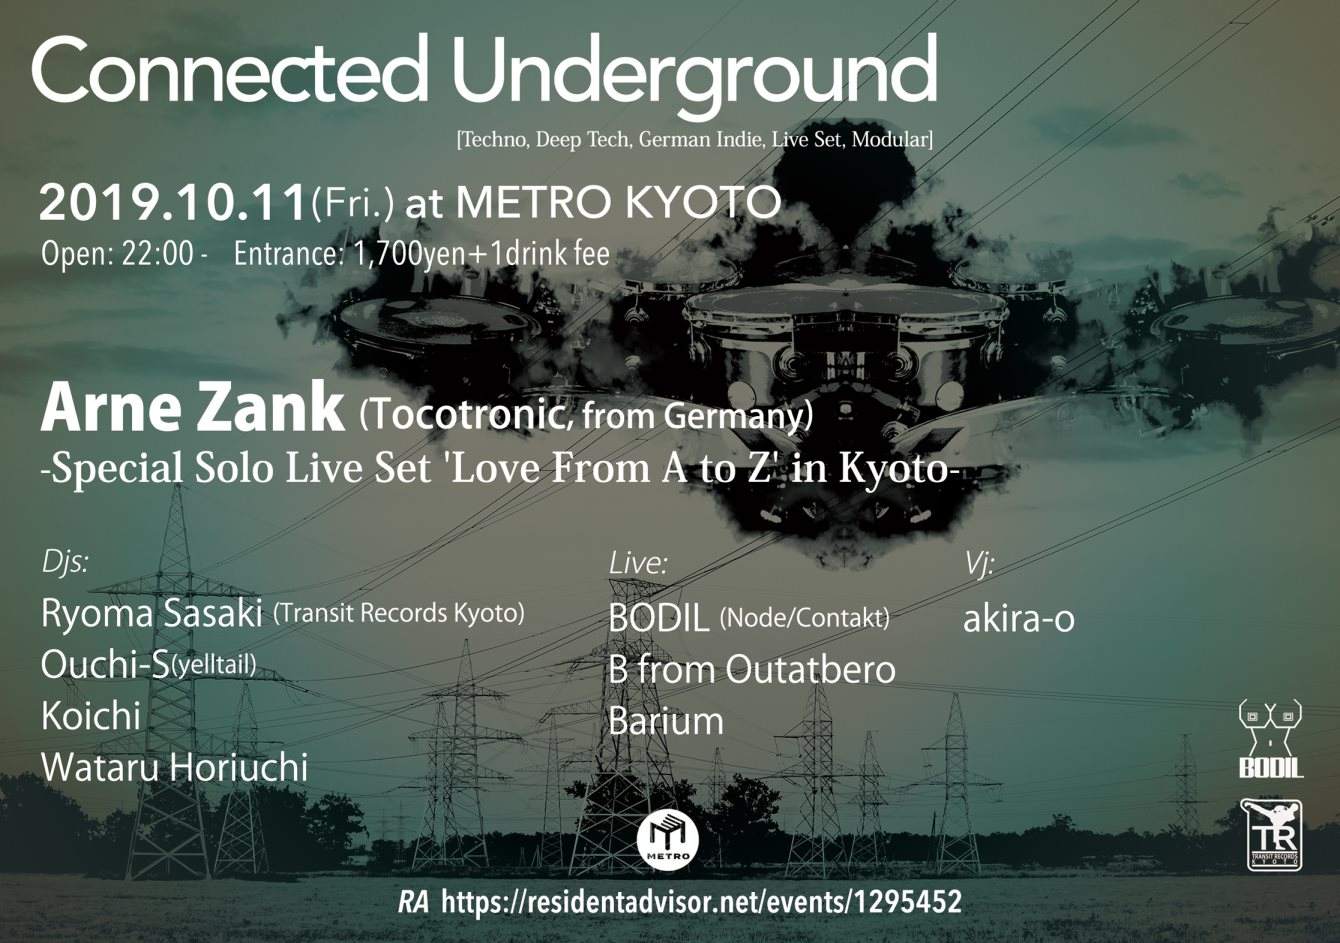 Connected Underground -Arne Zank (Tocotronic) Special Solo Live Set 'Love From A to Z' in Kyoto - Página frontal